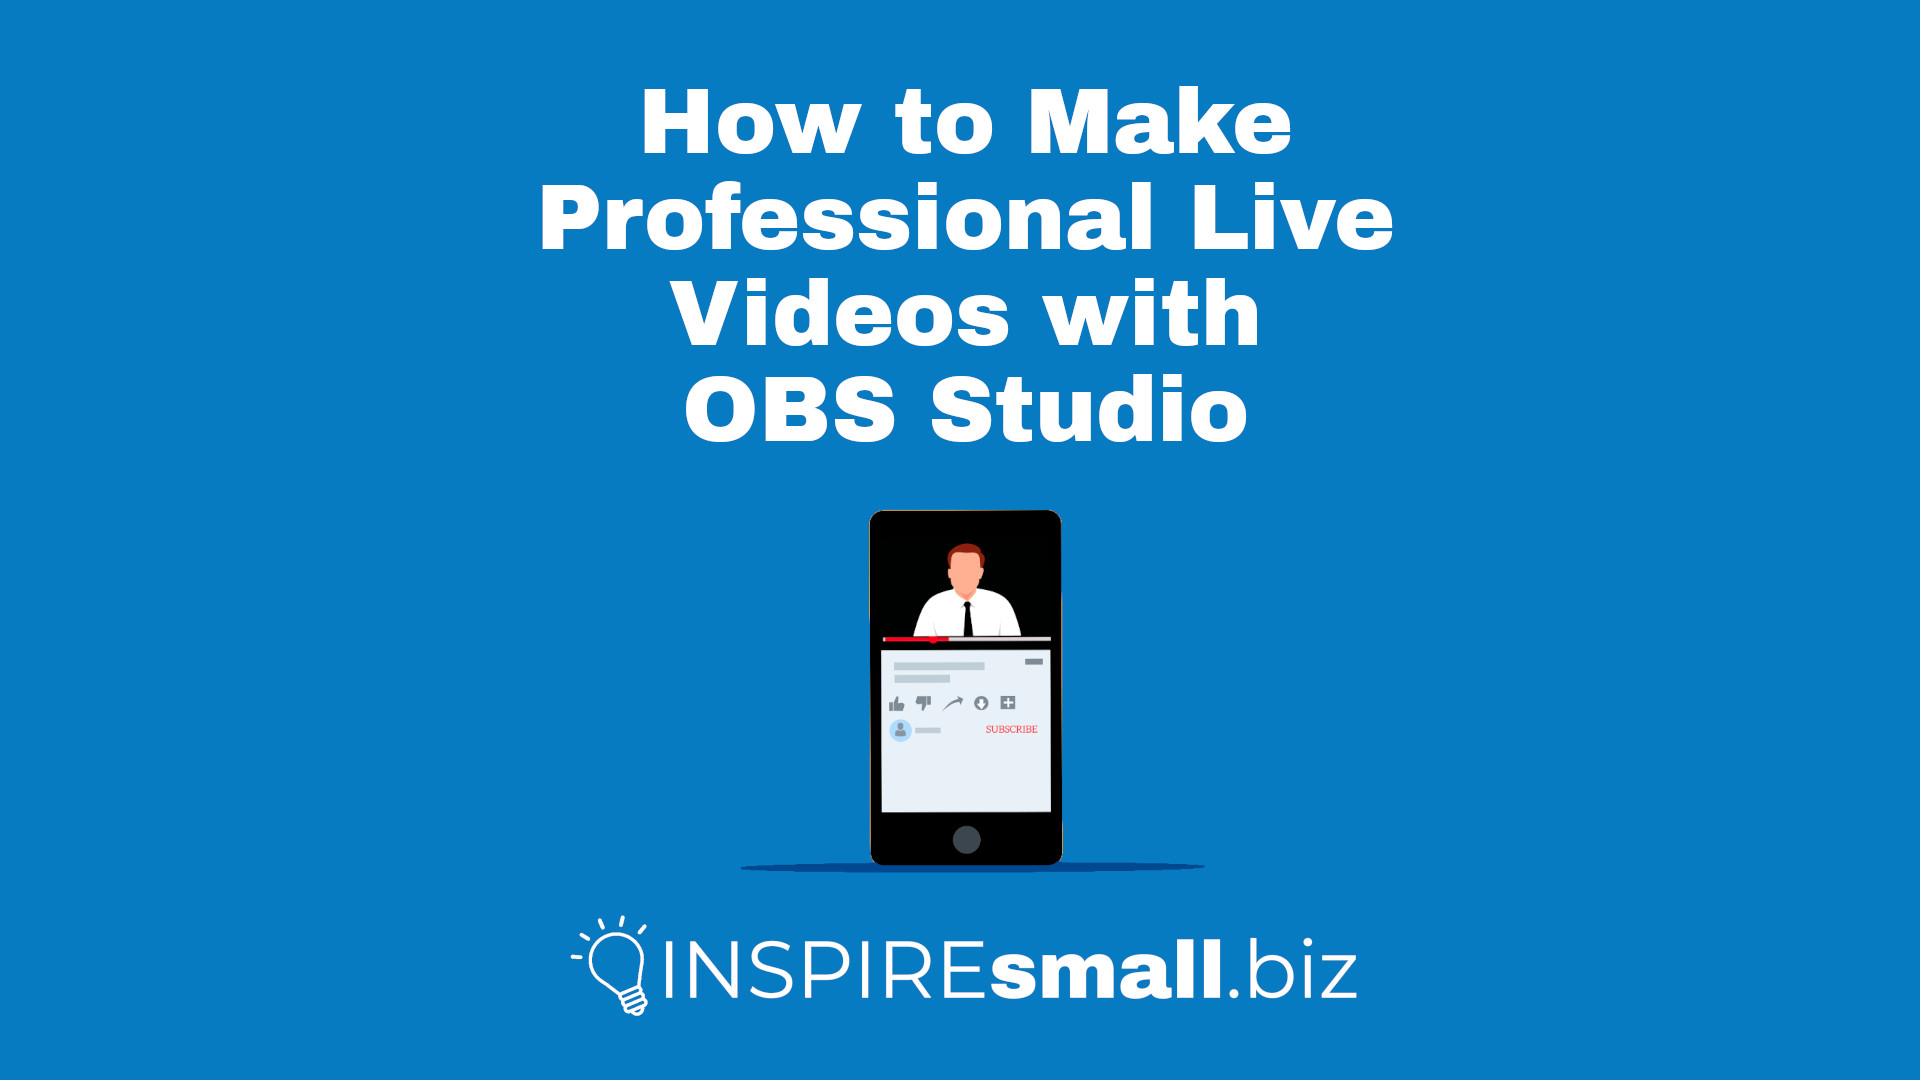 How to Make Professional Live Videos with OBS Studio